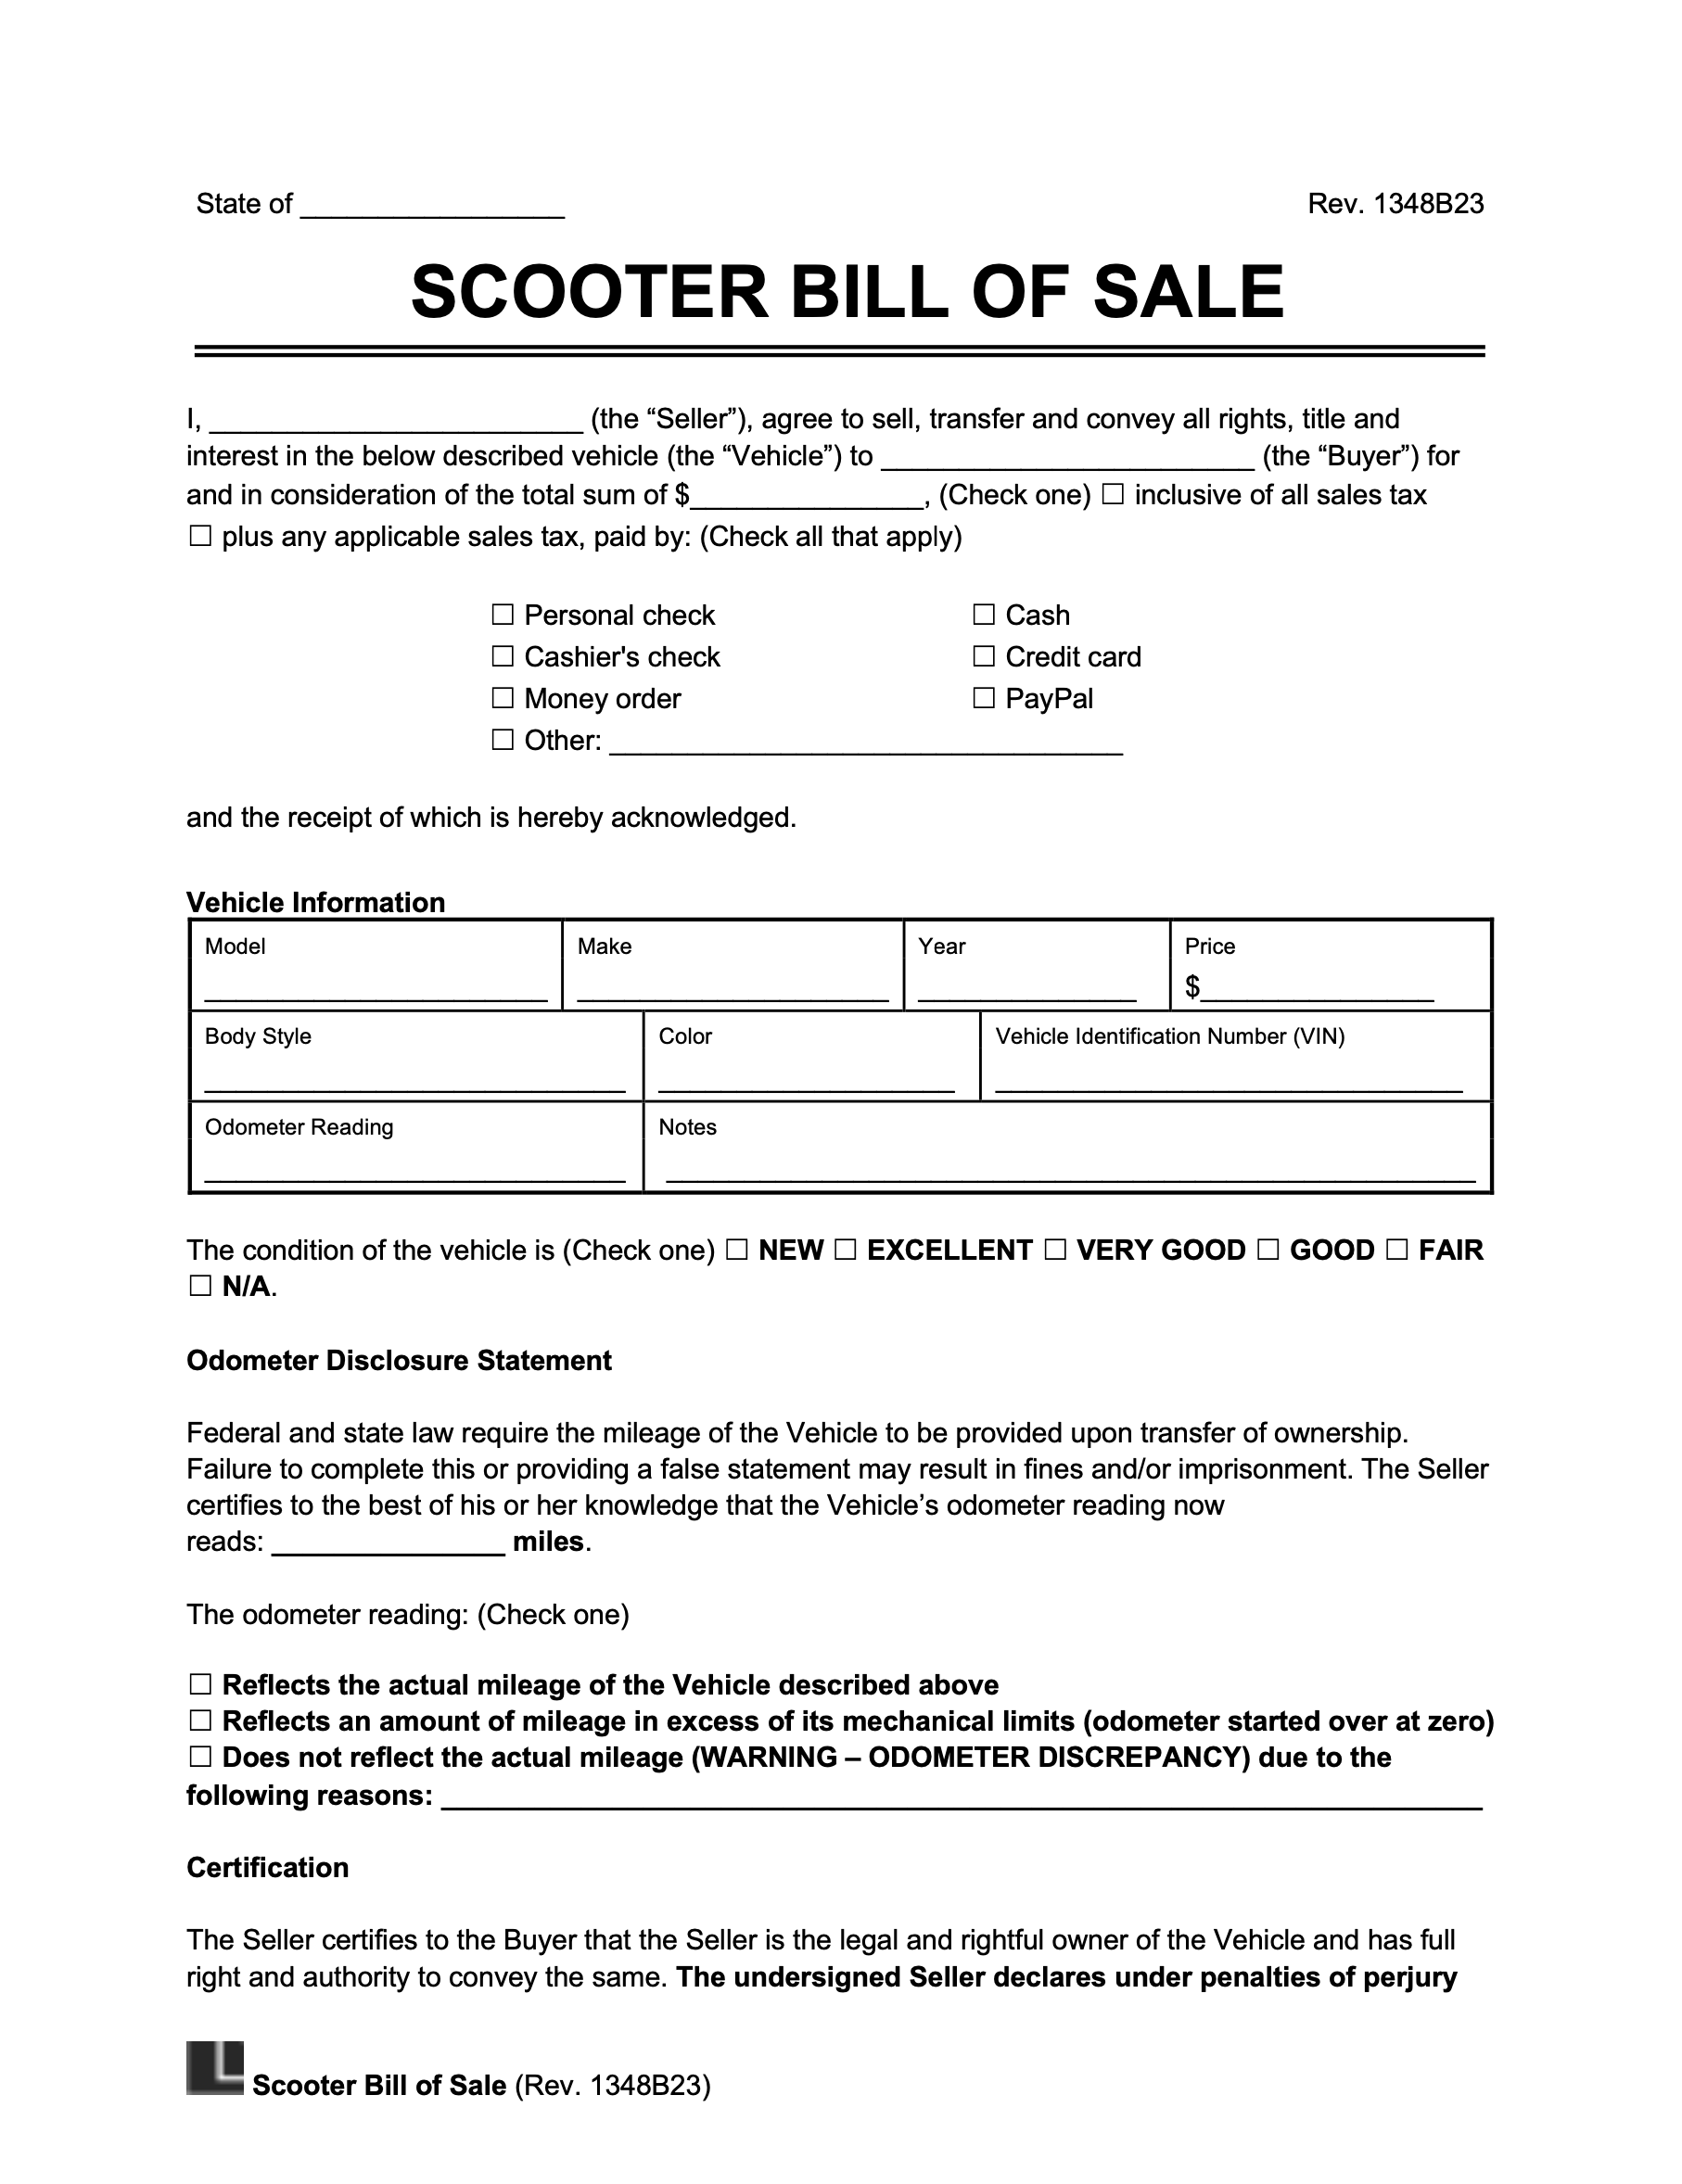 scooter bill of sale template